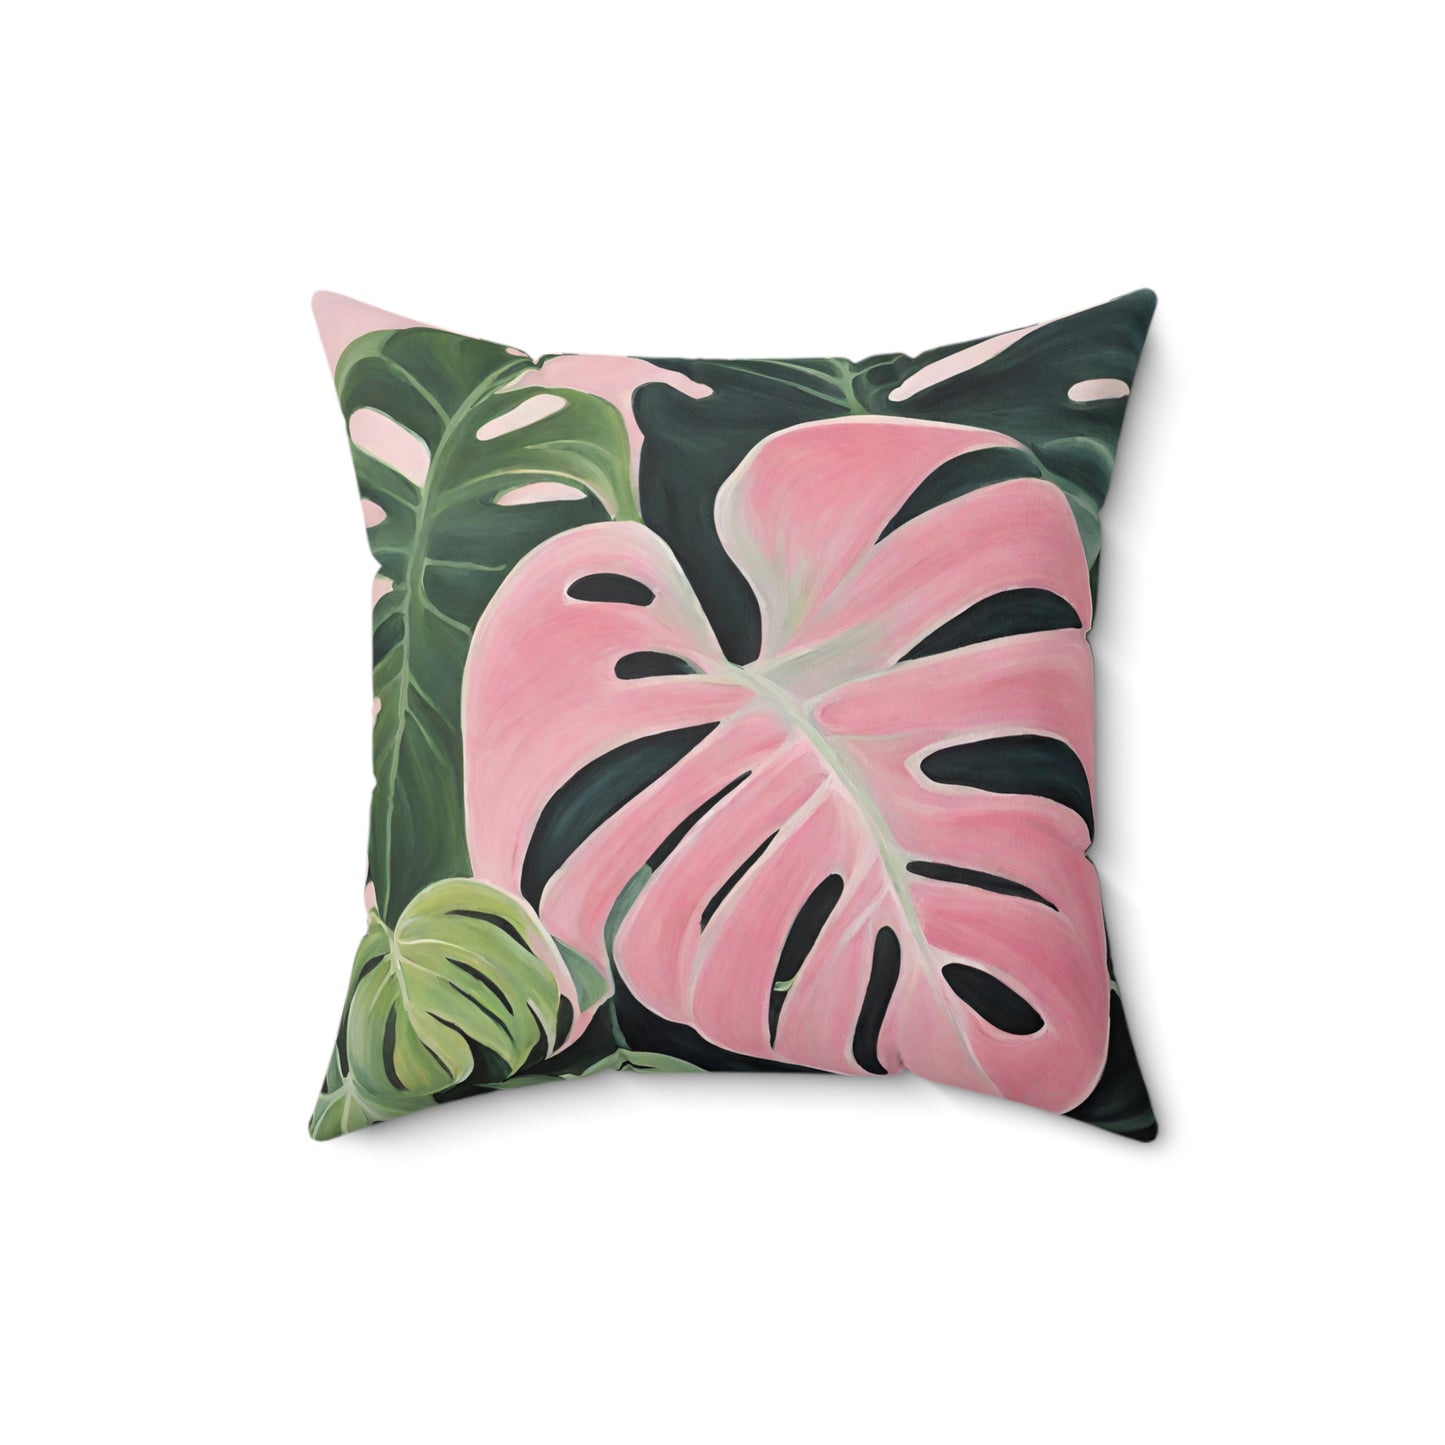 Philodendron Pink Princess Leaves Square Pillow - 3 Sizes